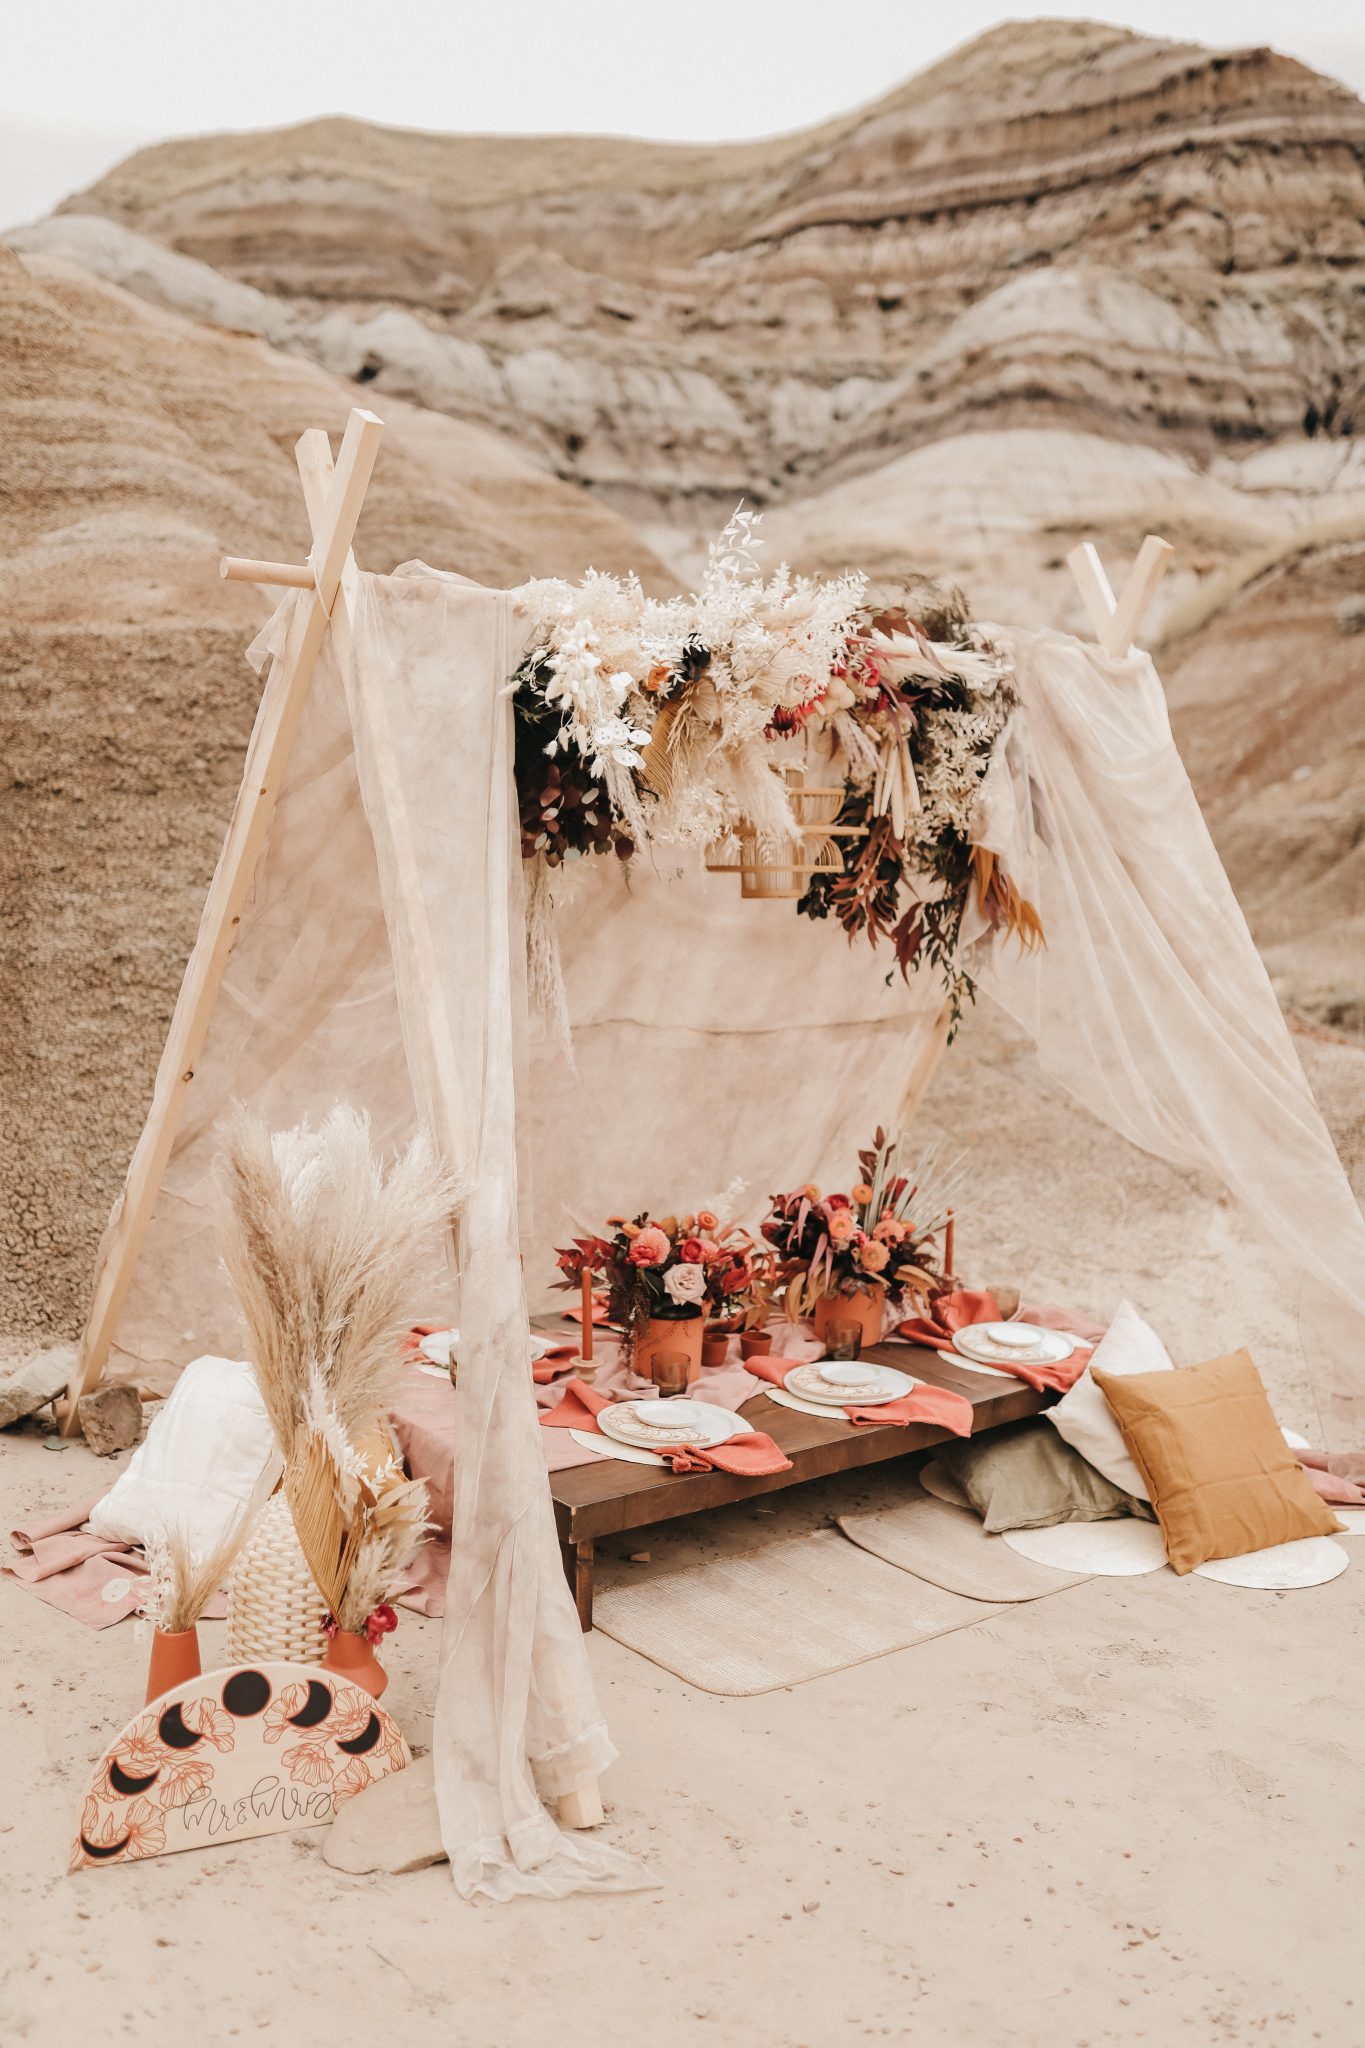 Moroccan inspired elopement tent with linen, pillows, boho terracotta flowers and a wicker chandeleir